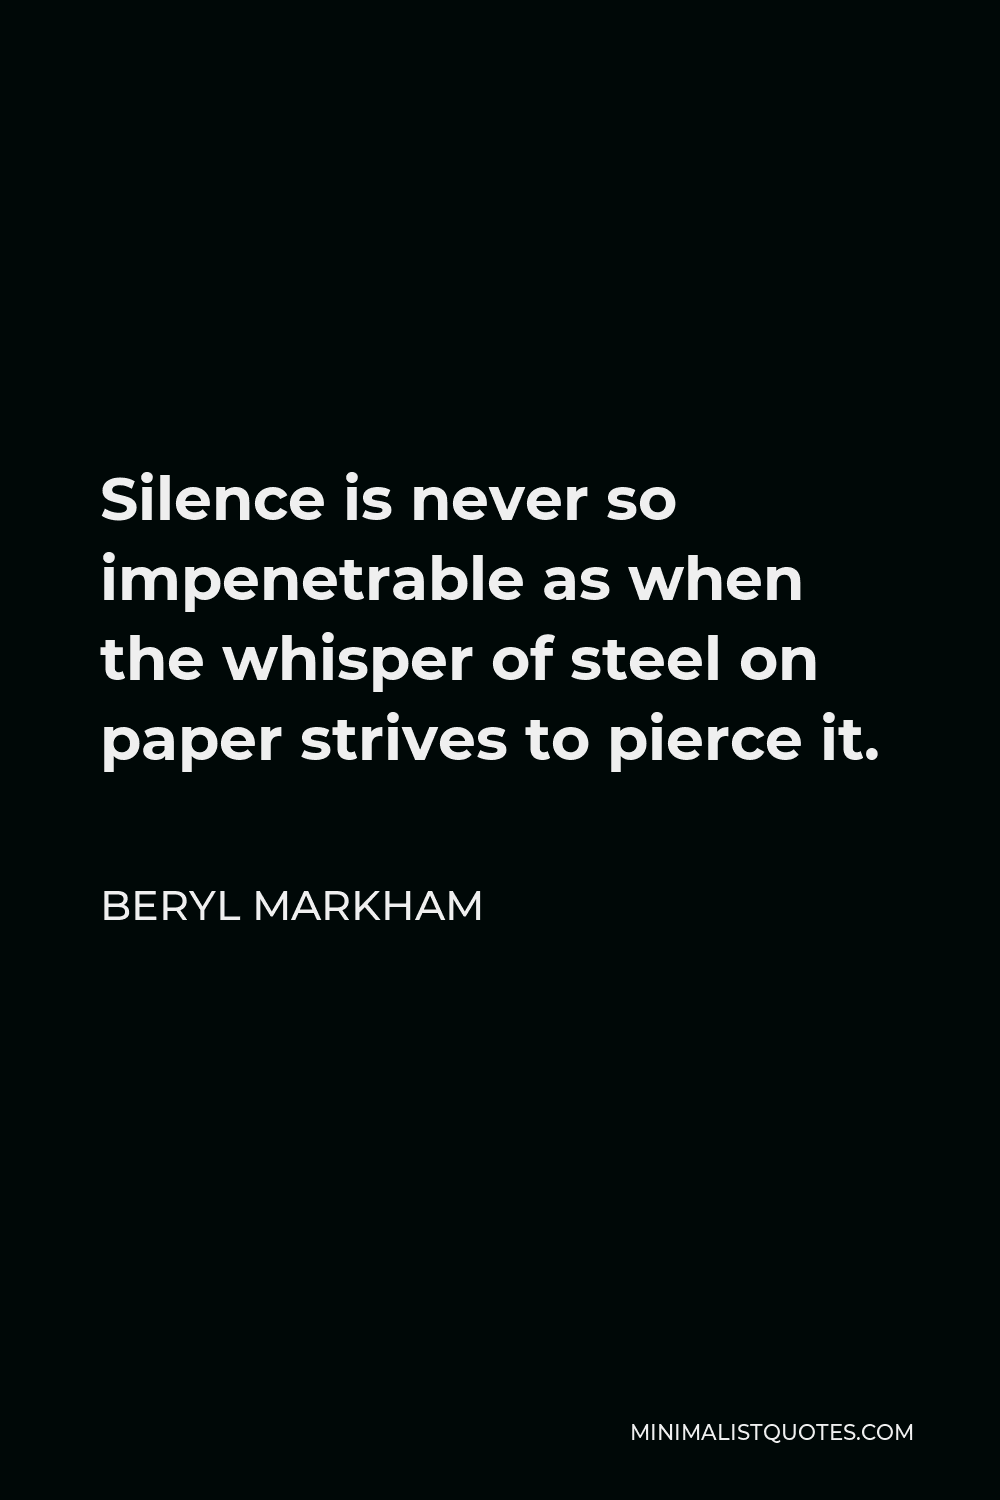 Beryl Markham Quote - Silence is never so impenetrable as when the whisper of steel on paper strives to pierce it.